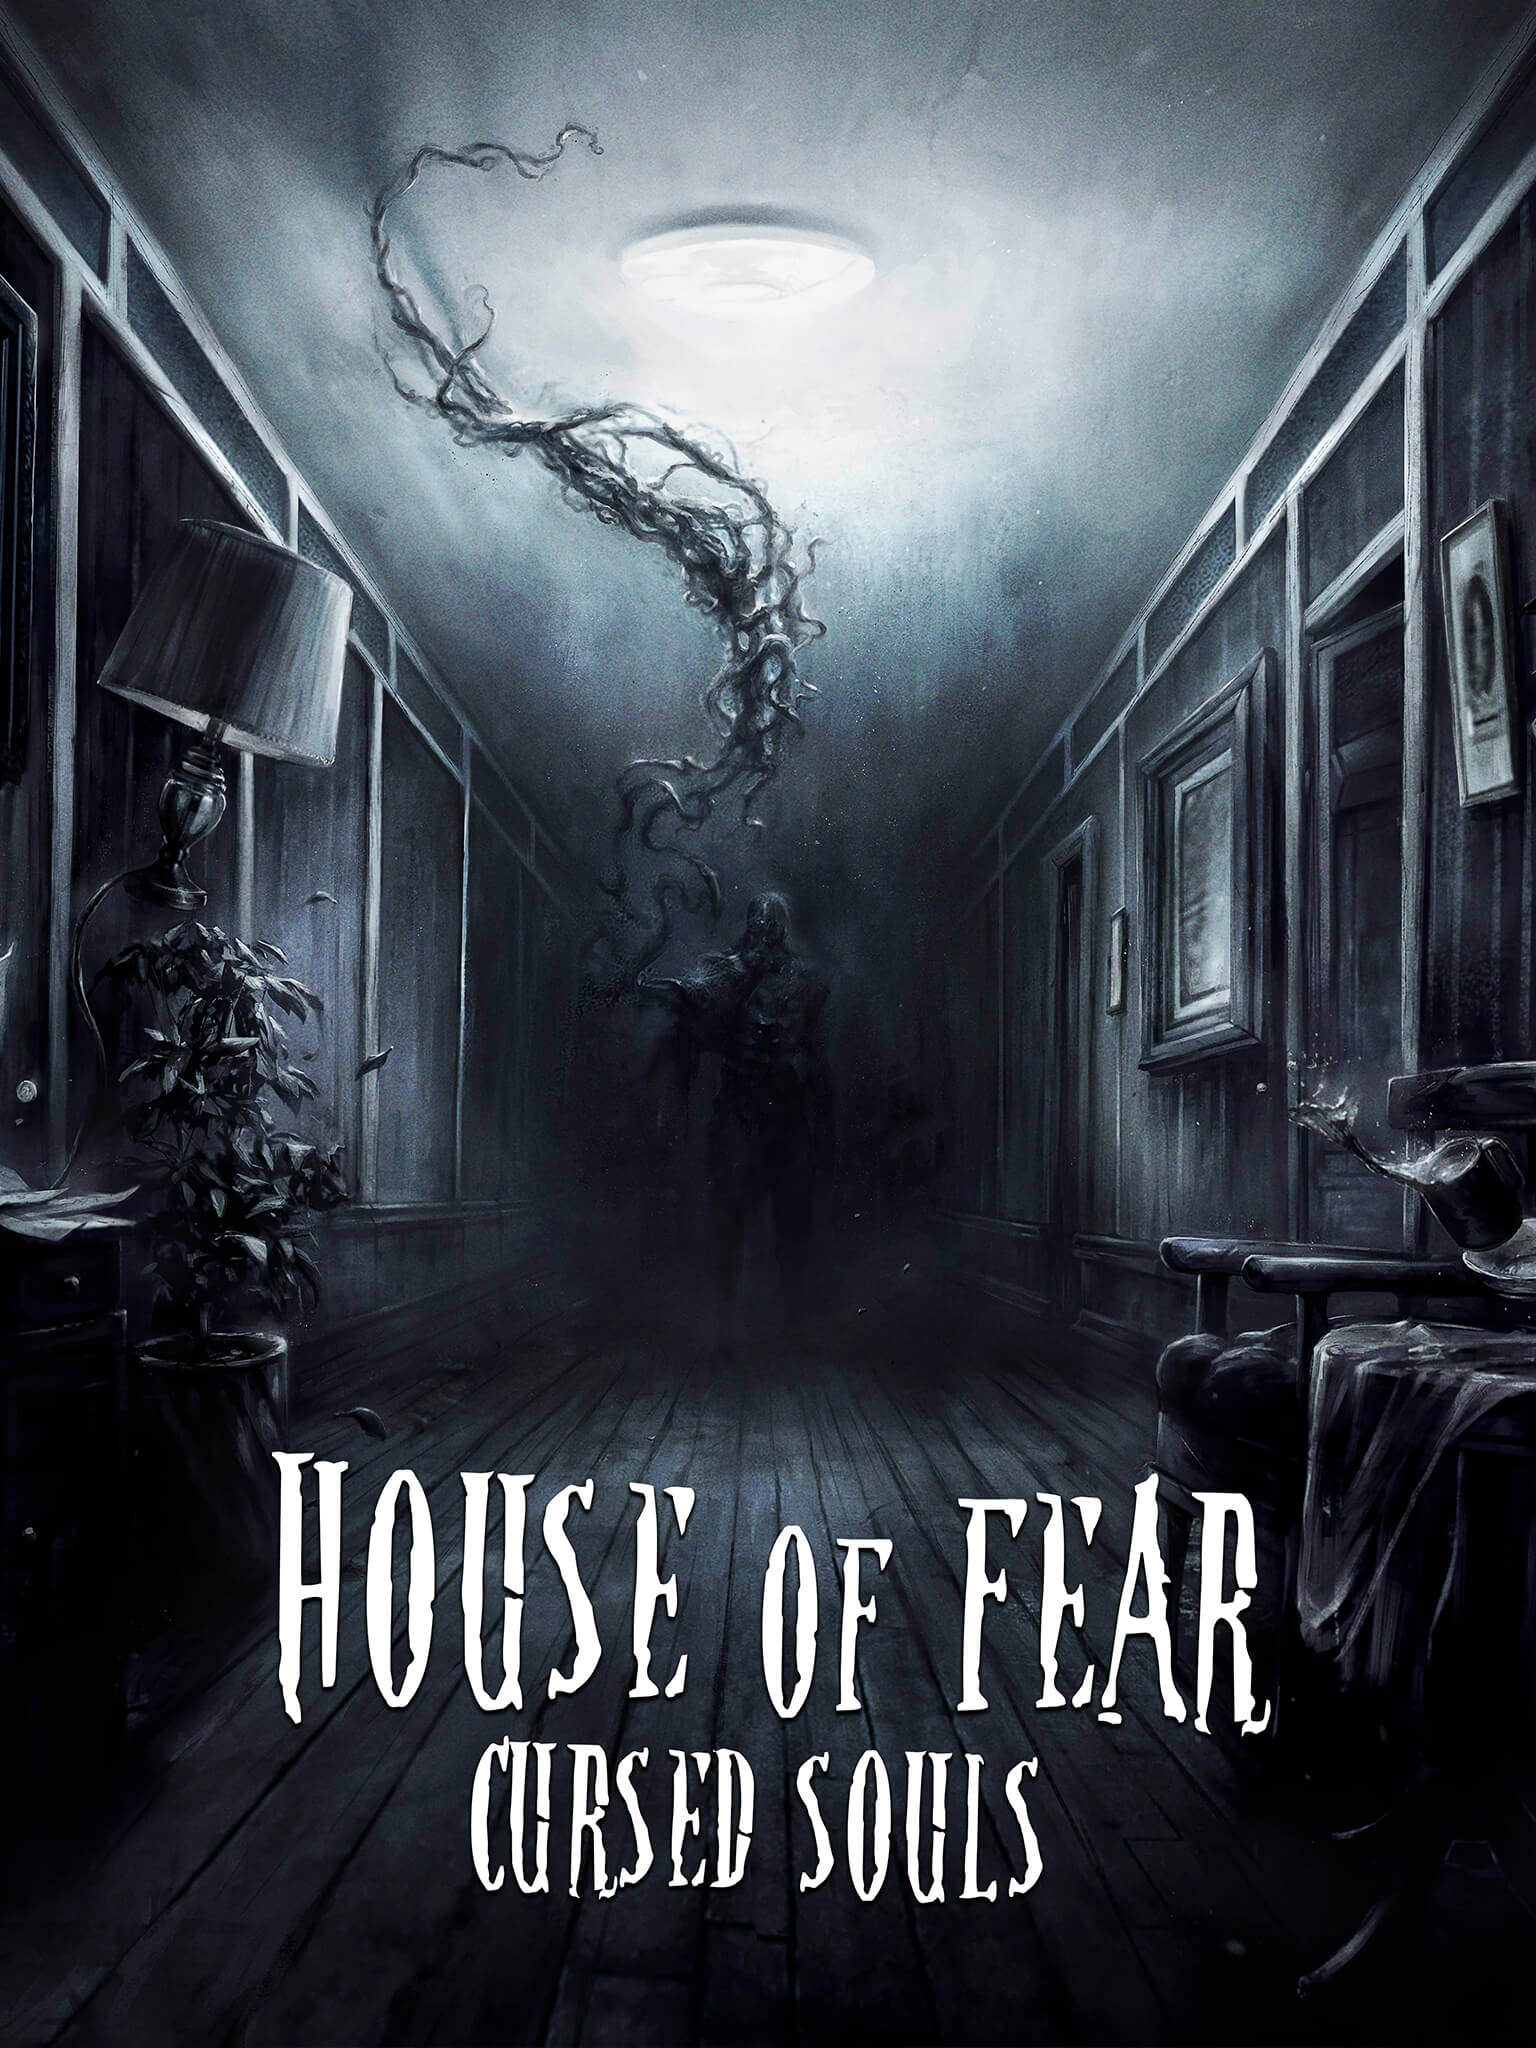 House of Fear: Cursed Souls